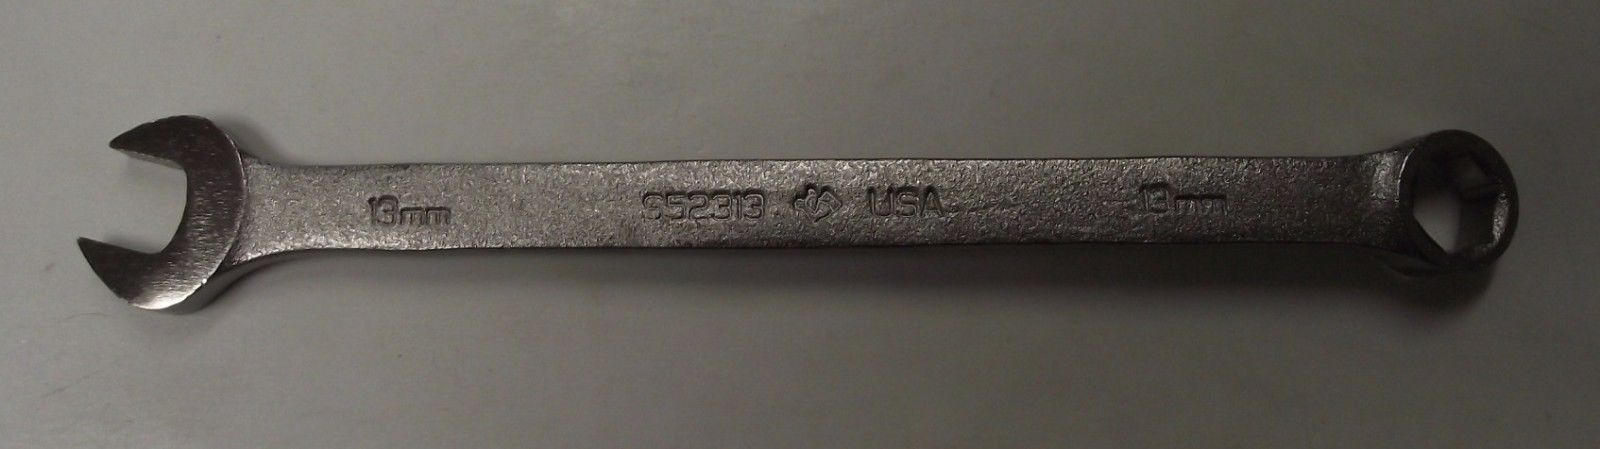 Armstrong S52313 13mm Satin Long Pattern Combination Wrench 6 Point USA